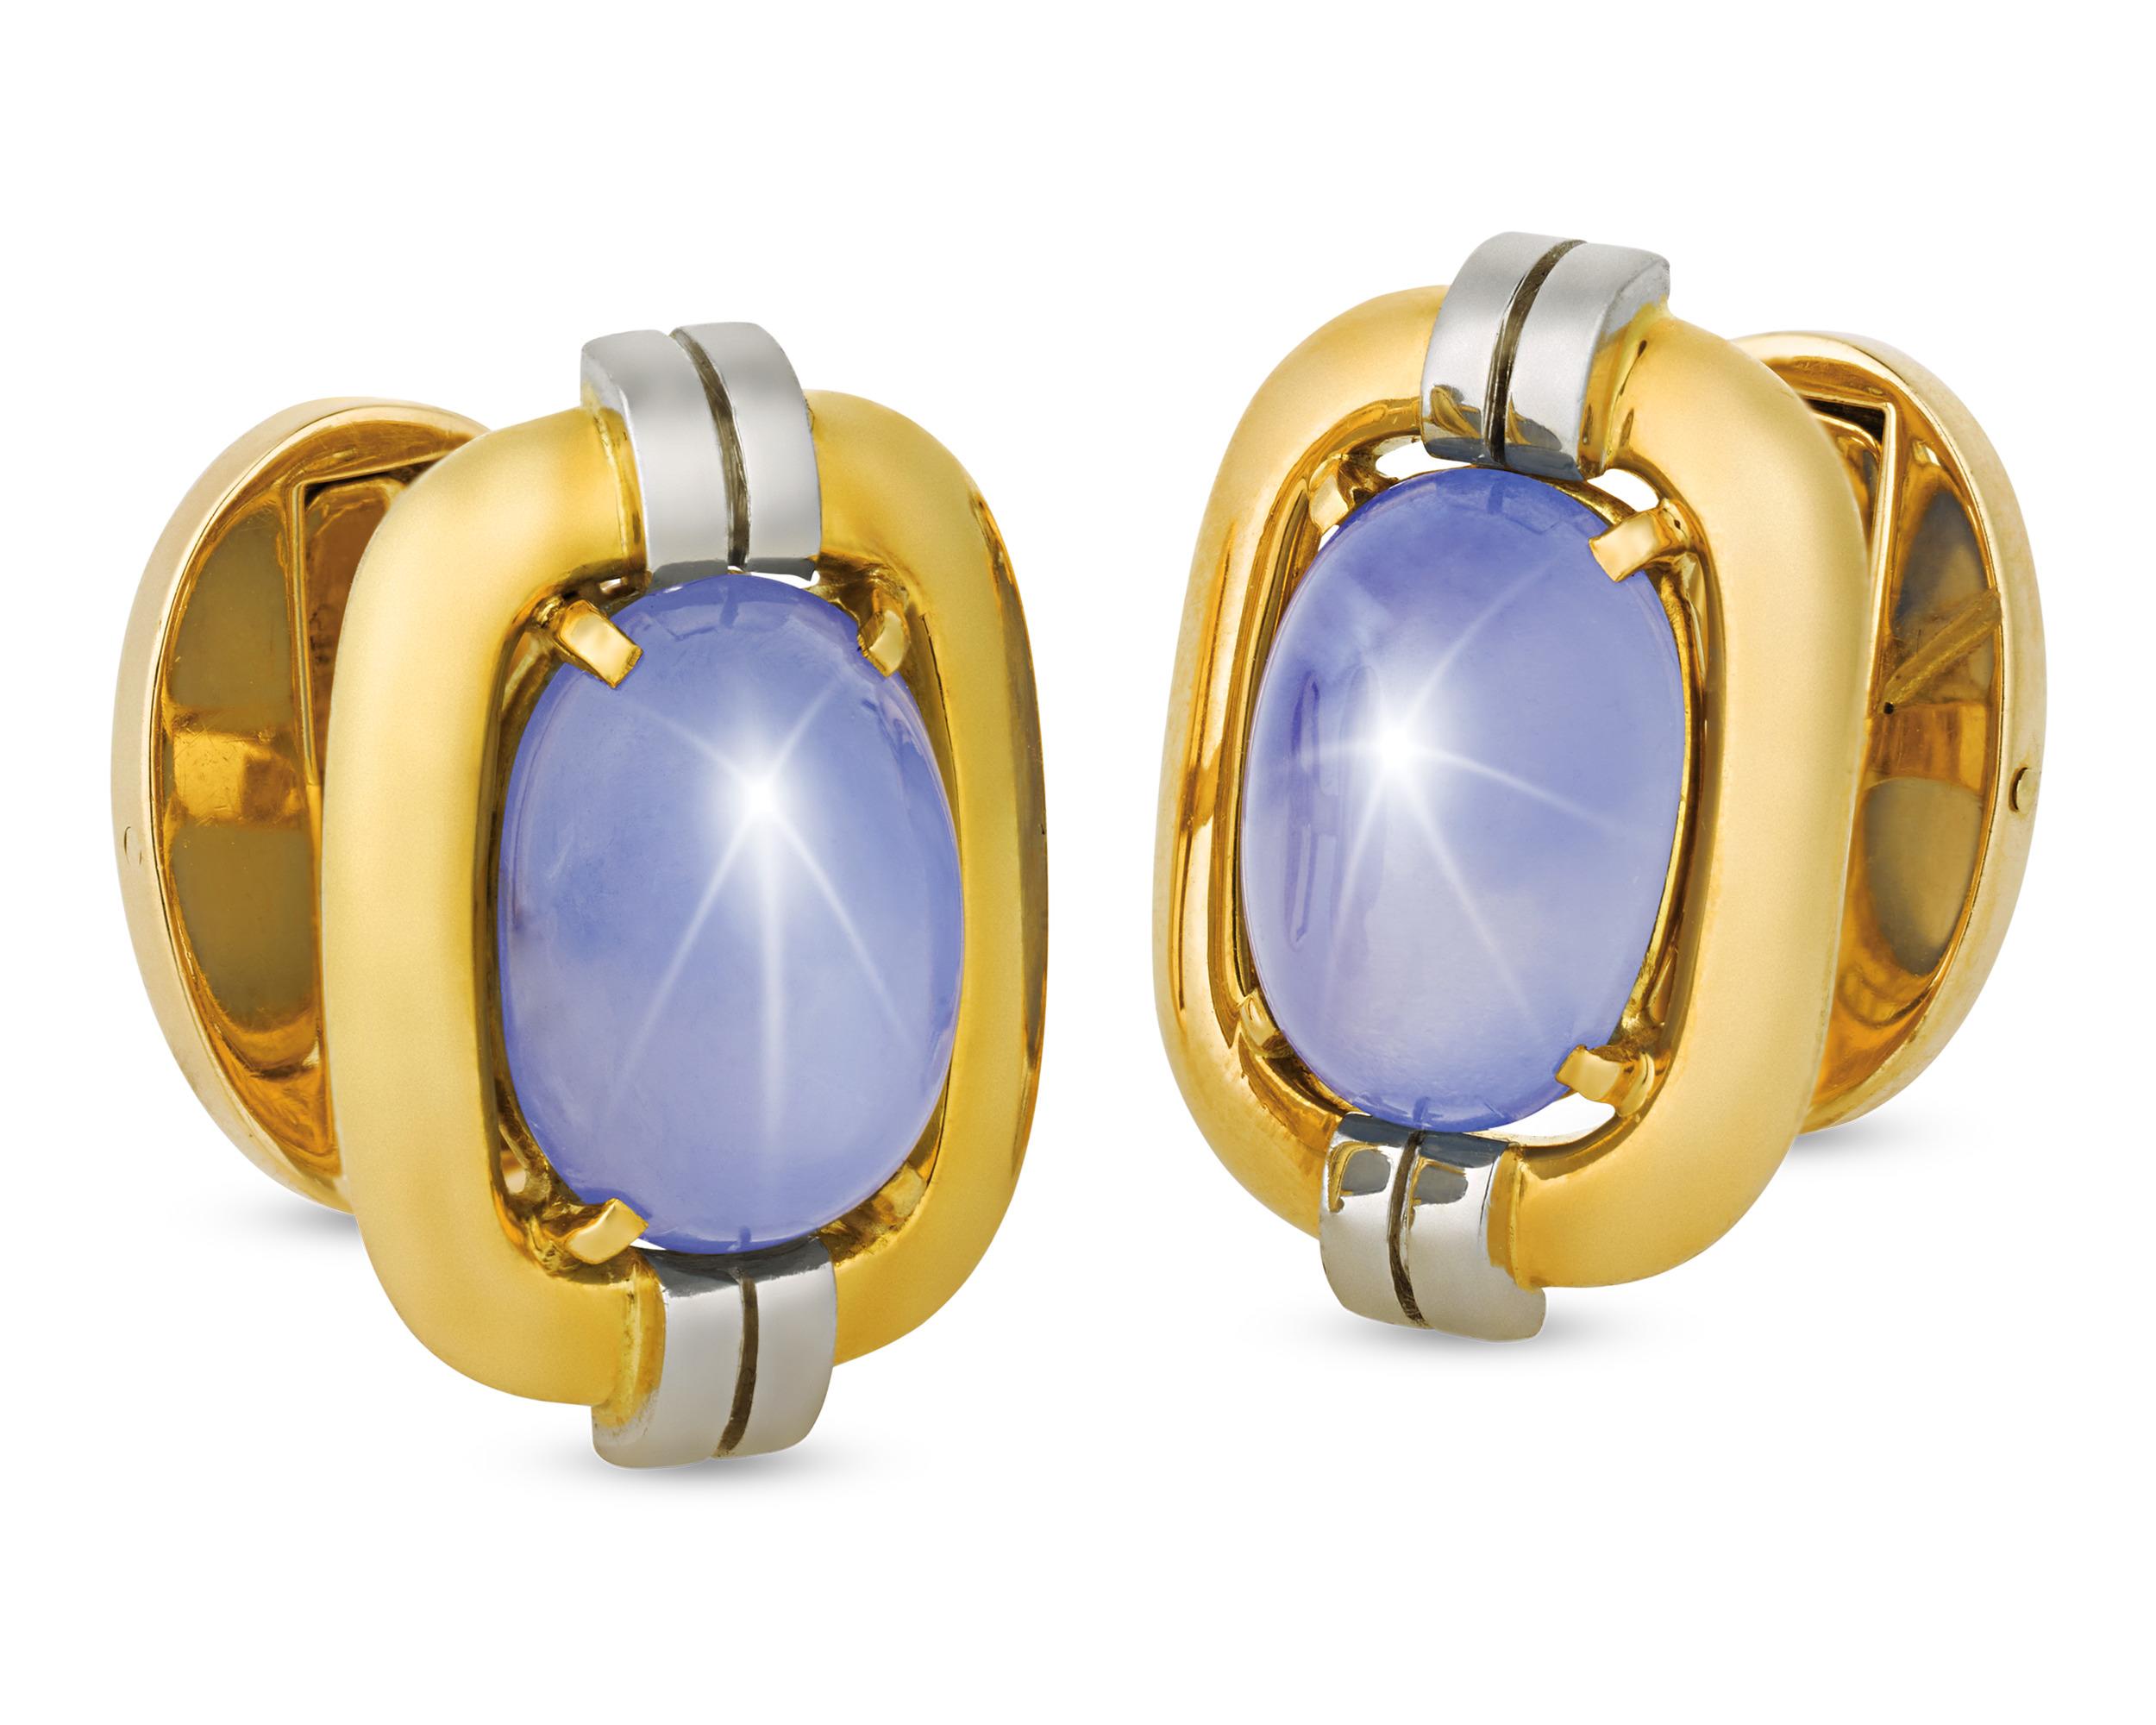 Two star sapphires totaling approximately 30.00 carats display a sophisticated hue and shine in these classic men's cufflinks from Cartier. The star sapphire’s trademark six-pointed star is the result of a phenomenon called asterism. The stone